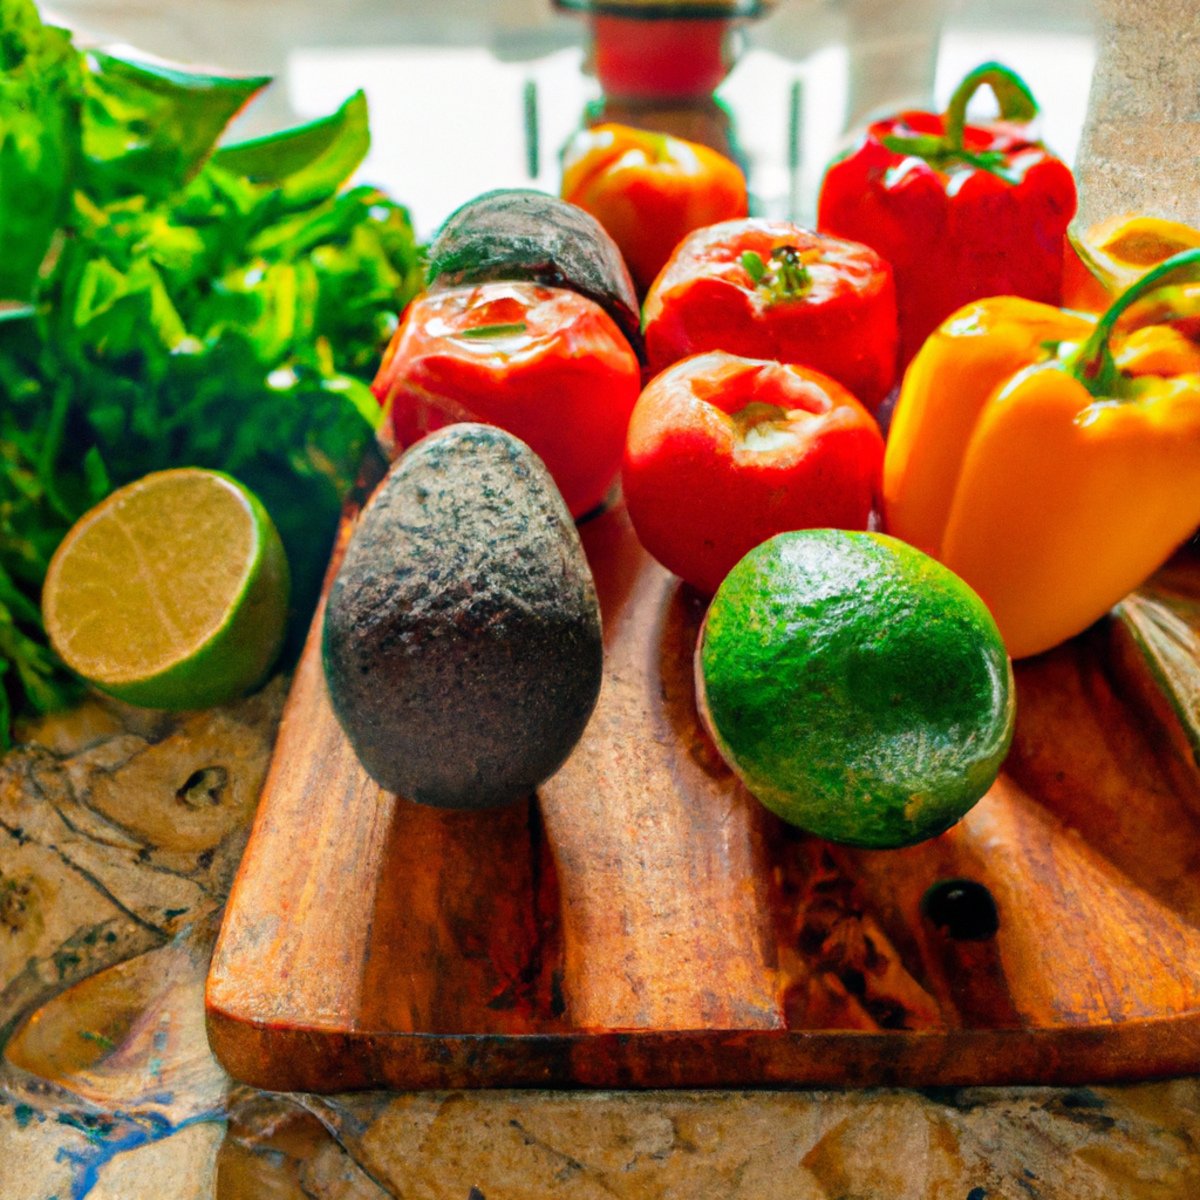 The photo depicts a wooden cutting board with a variety of colorful fruits and vegetables arranged neatly on top. A ripe avocado, juicy tomatoes, crisp bell peppers, and leafy greens are just a few of the items on display. The vibrant colors and textures of the produce are highlighted by the natural light streaming in from a nearby window. In the background, a glass jar filled with grains and a small bottle of olive oil can be seen, emphasizing the importance of whole foods and healthy fats in a balanced diet. The overall effect is both appetizing and informative, encouraging readers to make the switch to organic foods for better digestive health.